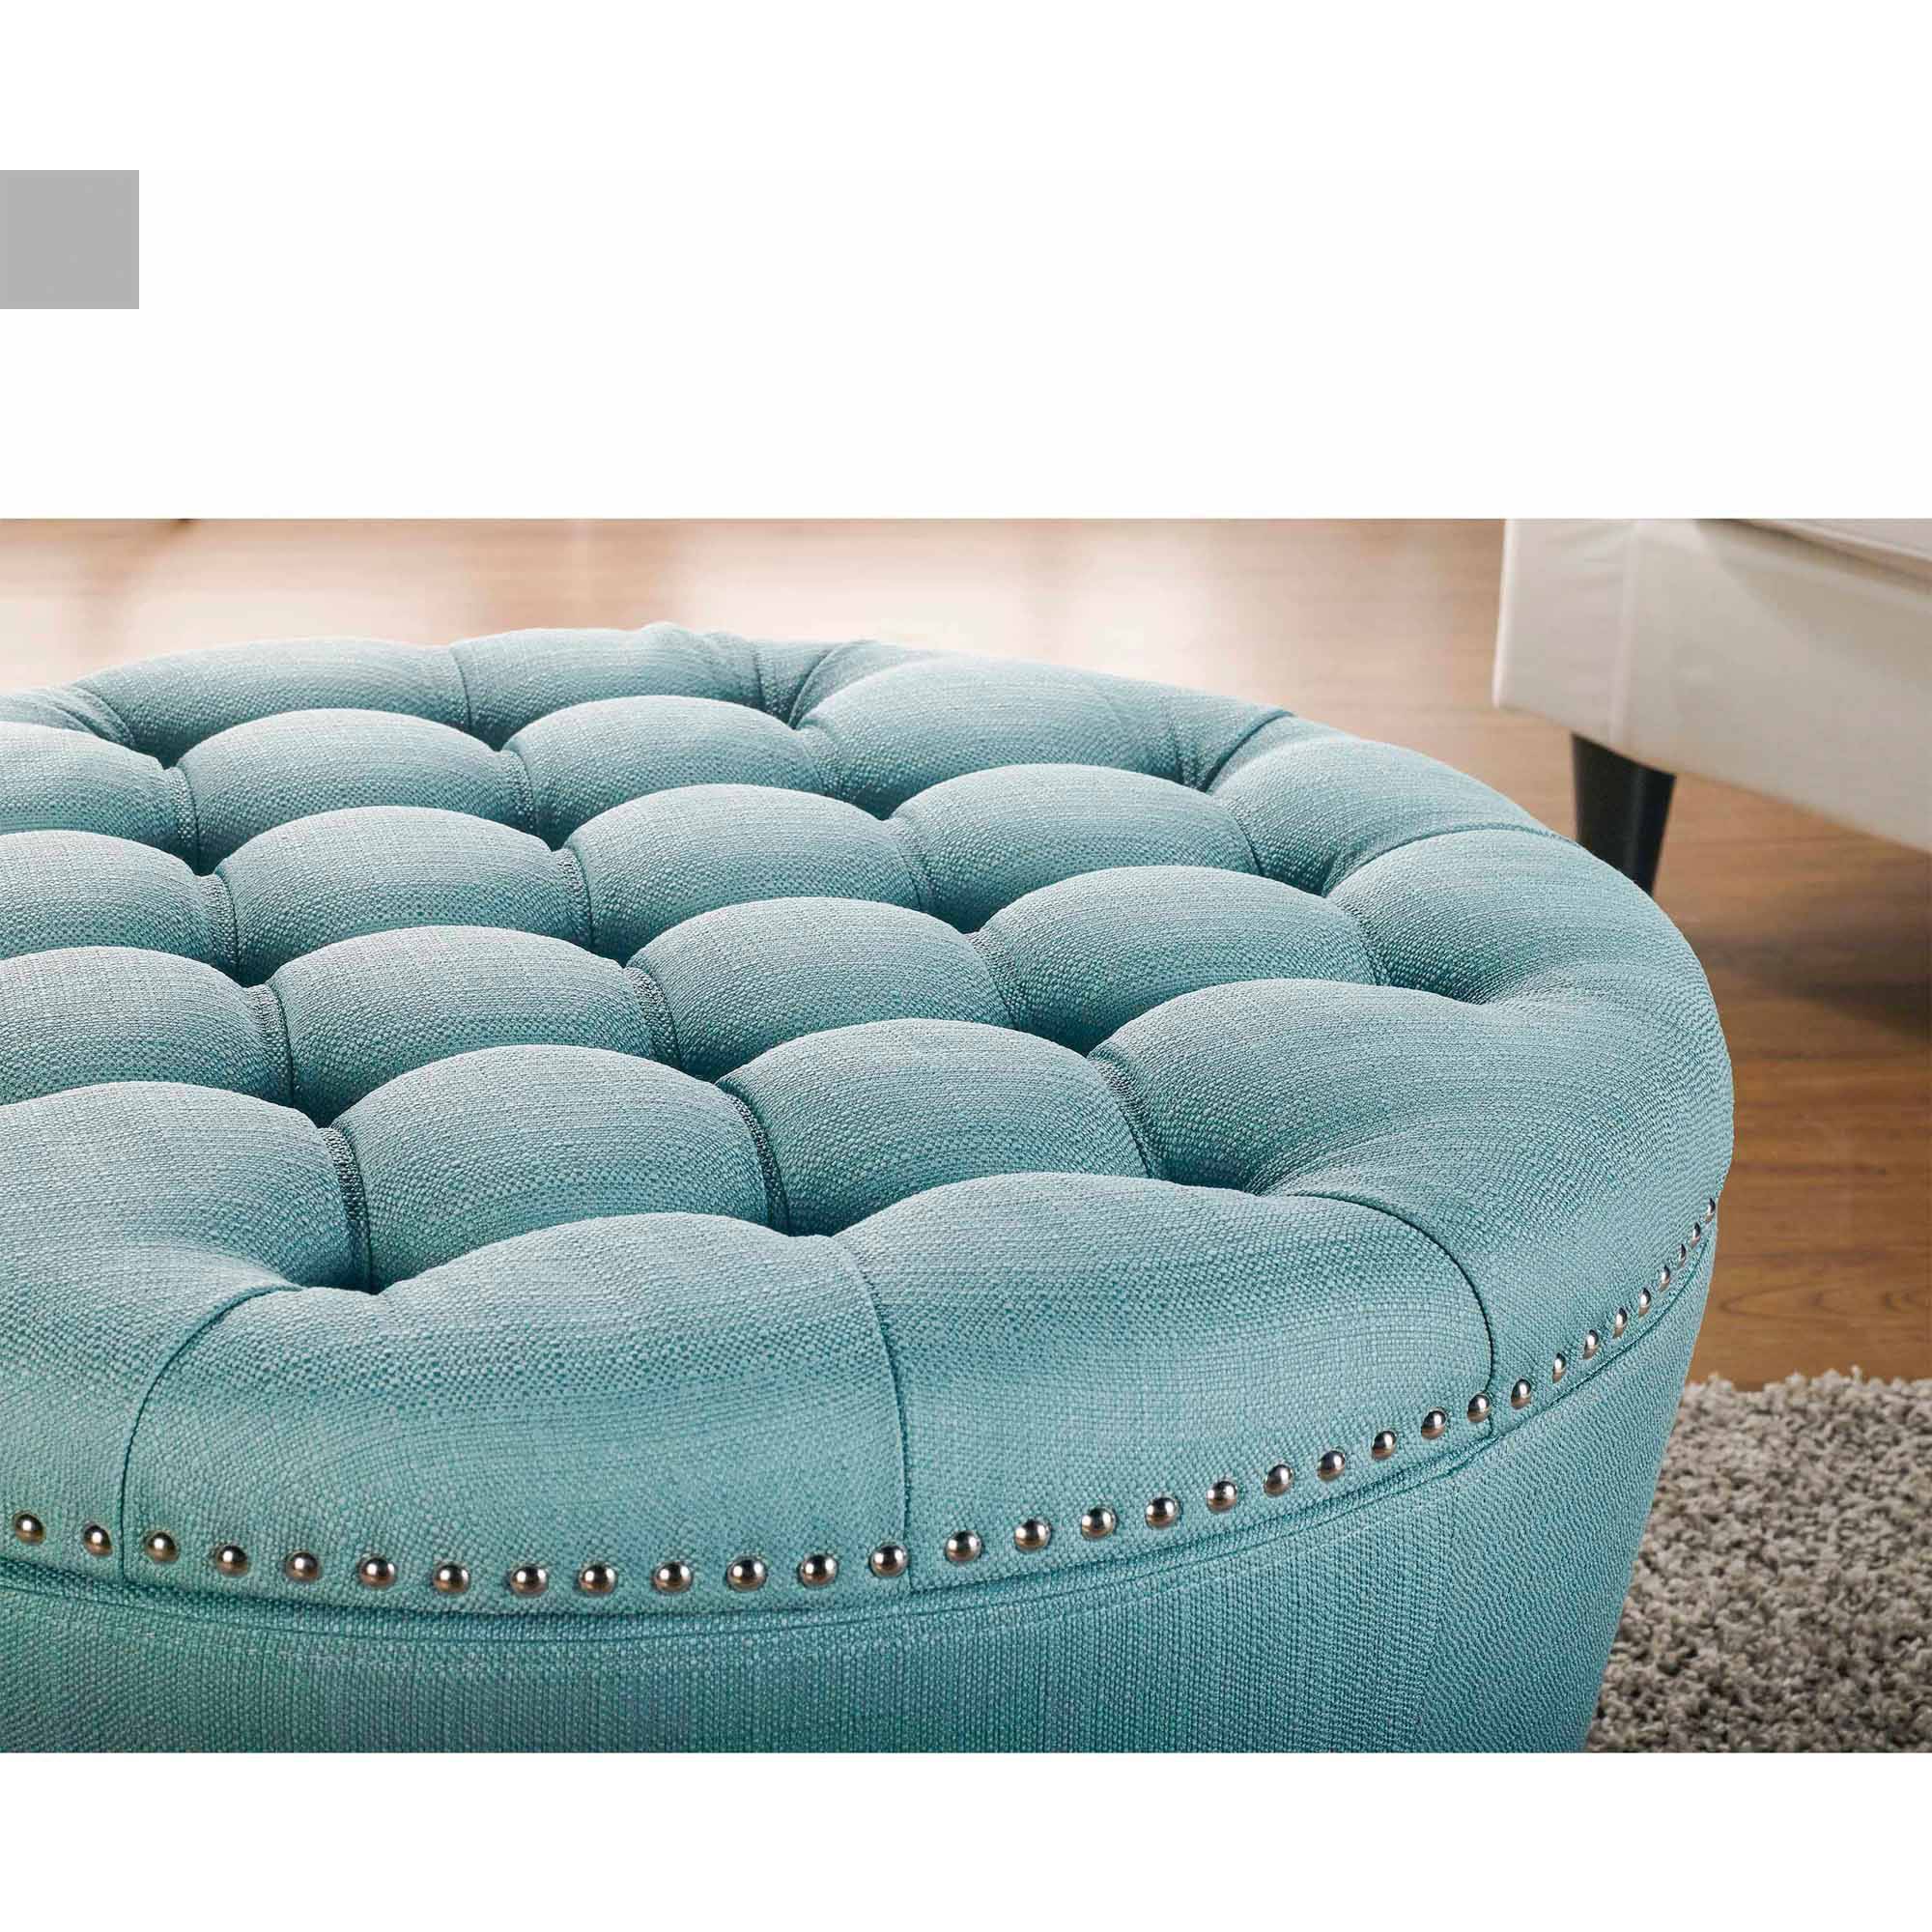 Better Homes & Gardens Round Tufted Storage Ottoman with Nailheads, Teal - image 4 of 4